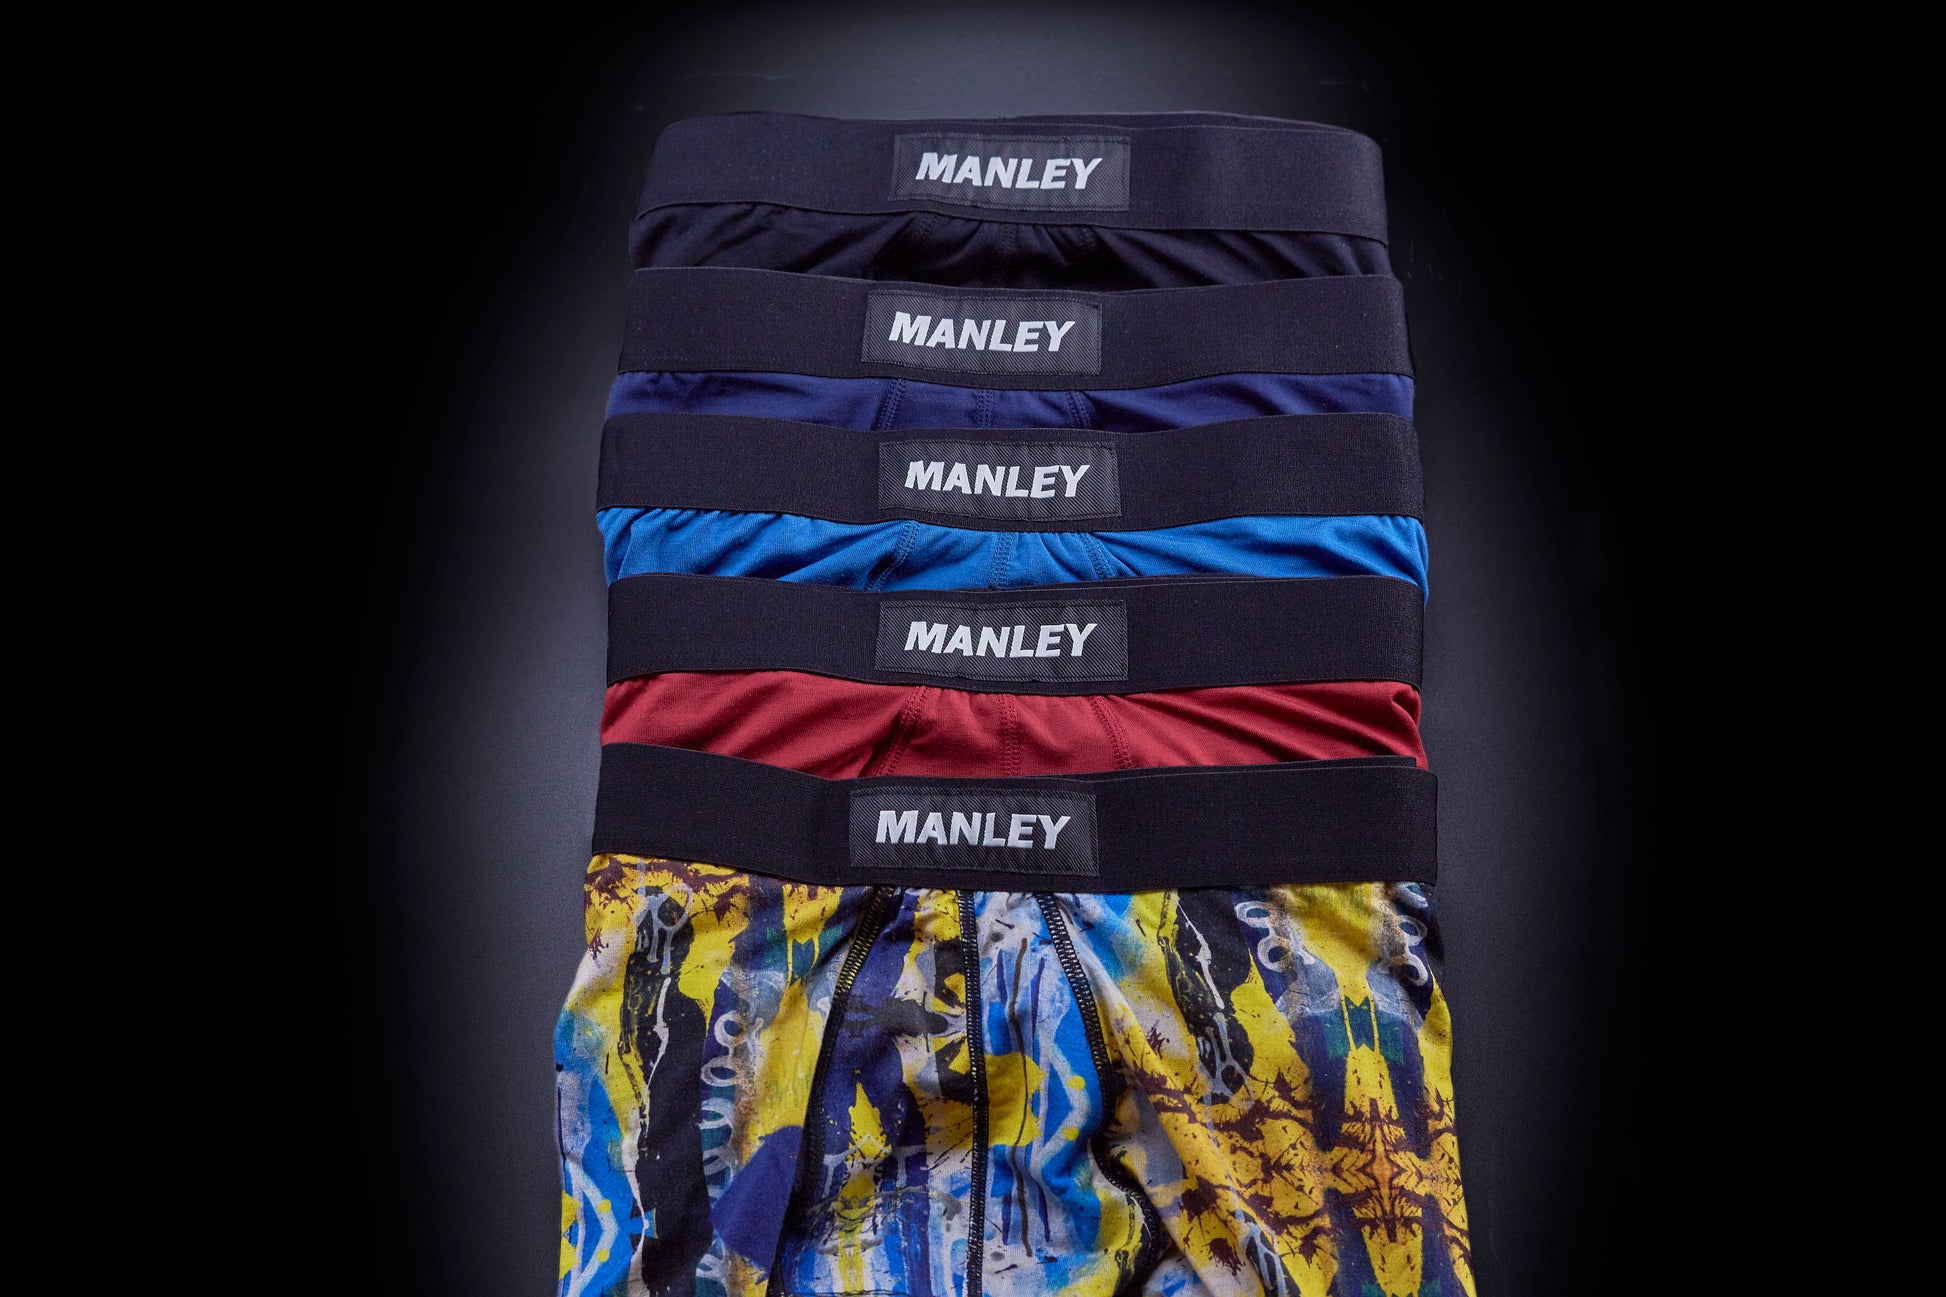 Multi-coloured boxer briefs with Manley Barrier Technology that stops the pee spot. Feel manly in Manley. Five pairs of Manley boxer briefs overlapping each other, showing/contrasting the different colours available